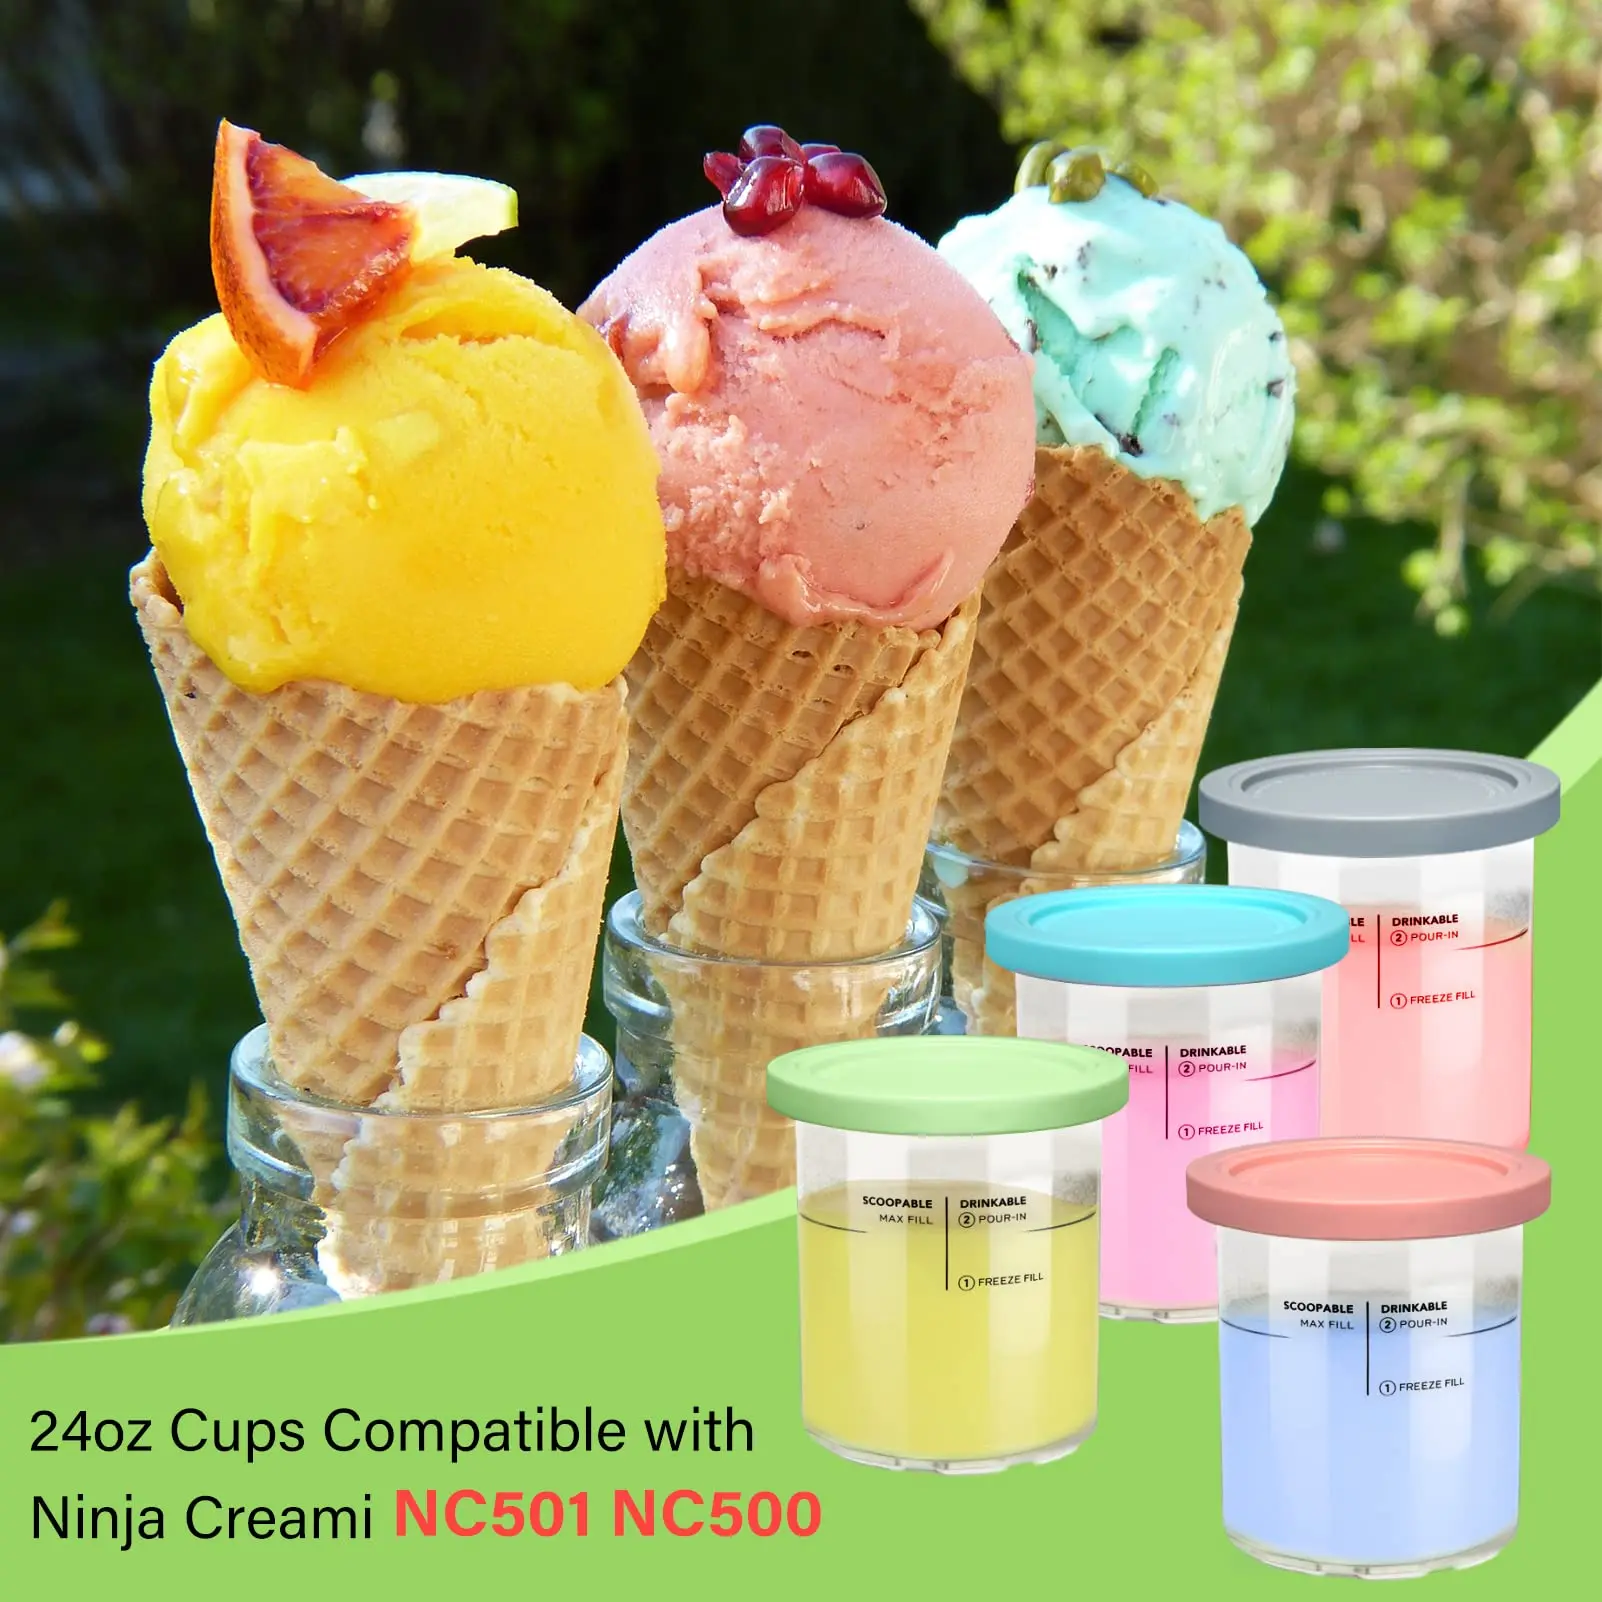 Ninja Creami Deluxe Pints 2 Pack, Compatible with NC500 Series Creami  Deluxe Ice Cream Makers, Genuine Ninja Pint, BPA-Free & Dishwasher Safe,  Color